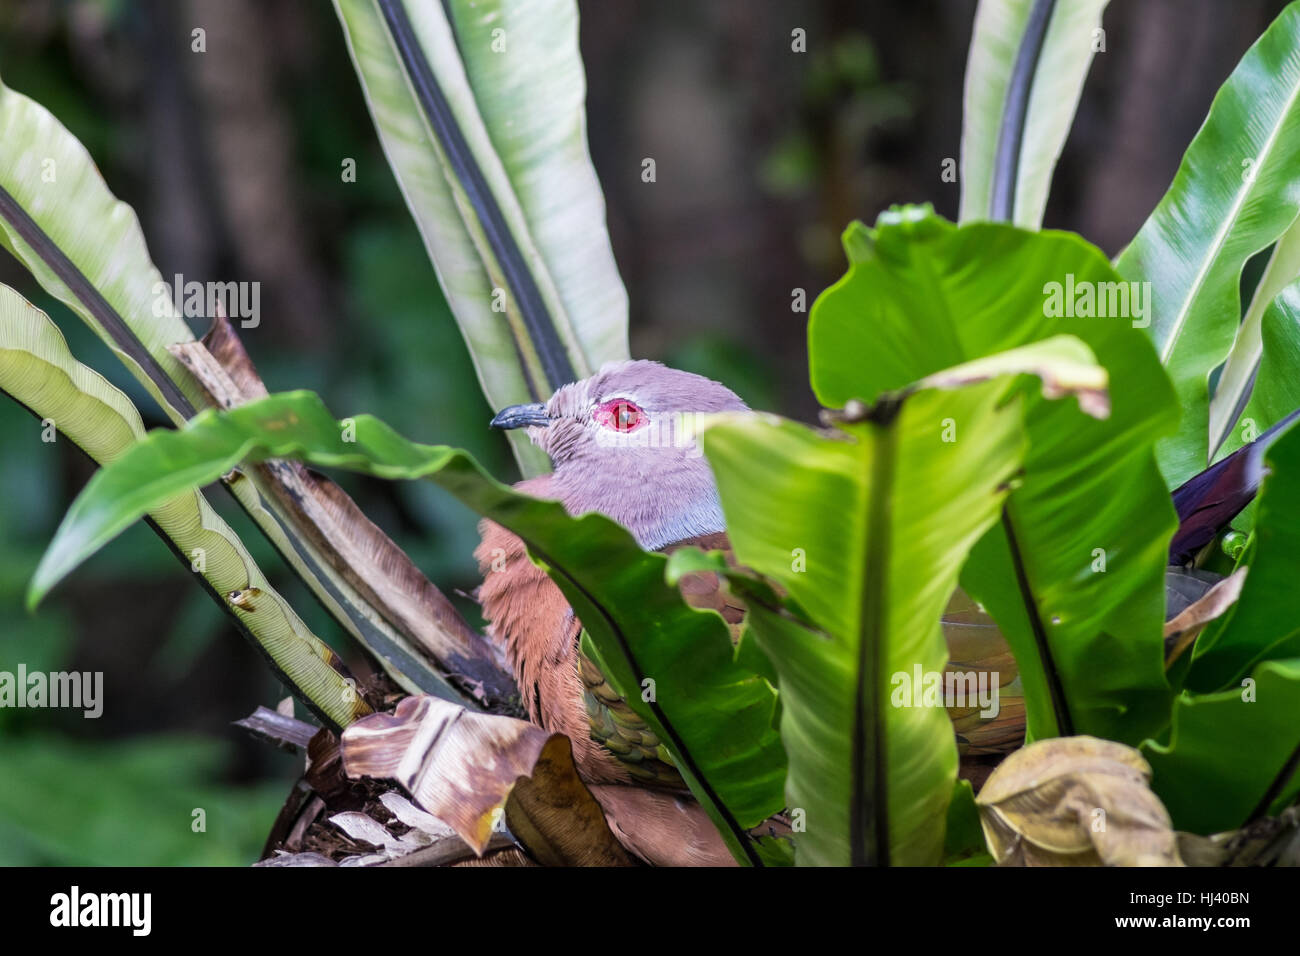 Purple-tailed imperial pigeon (Ducula rufigaster) hiding in foliage Stock Photo